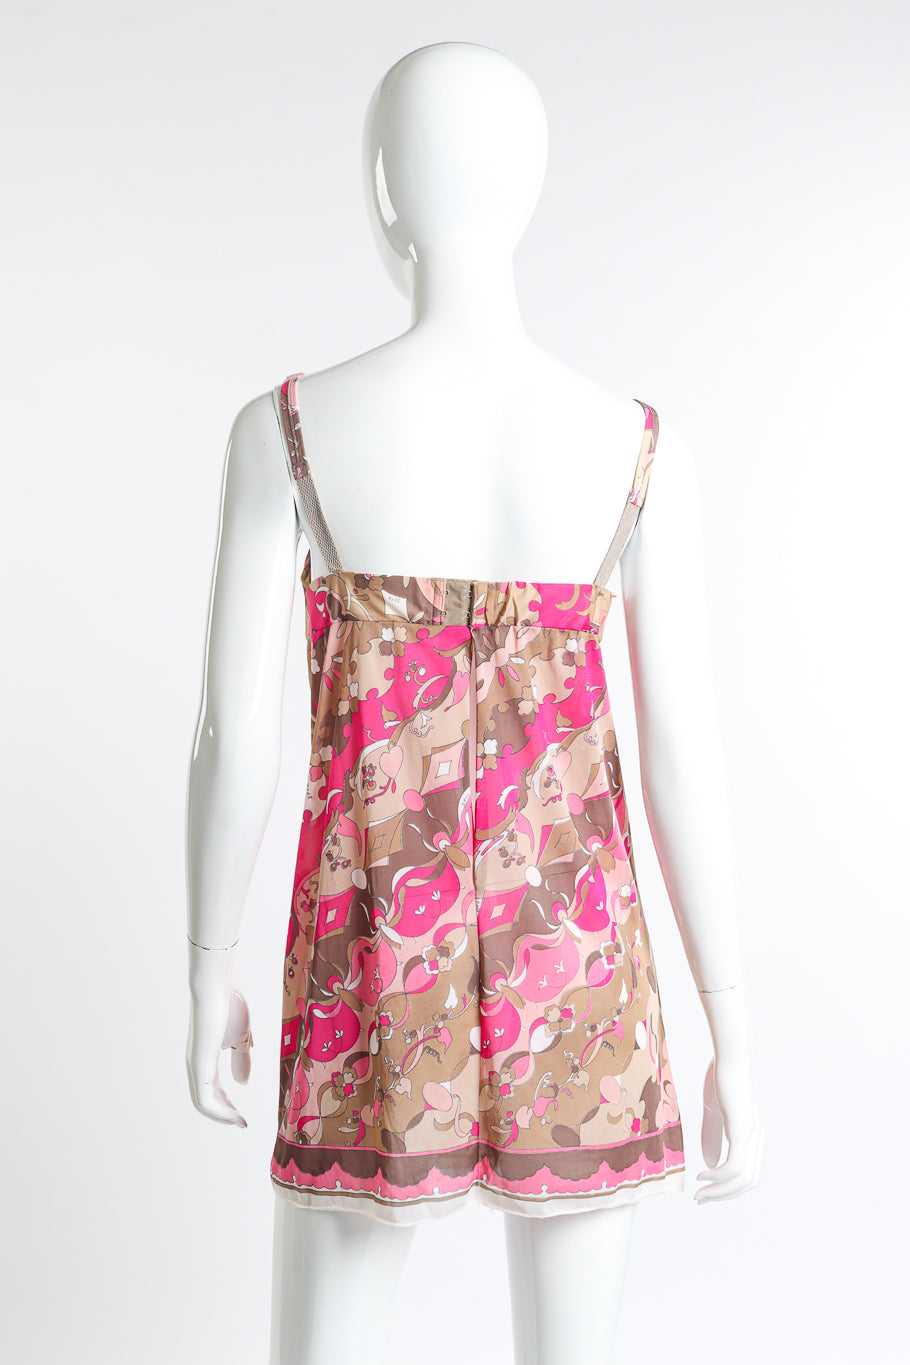 Vintage Emilio Pucci for Formfit Rogers taupe tan and pink mesh chemise back view as worn on mannequin @Recess LA